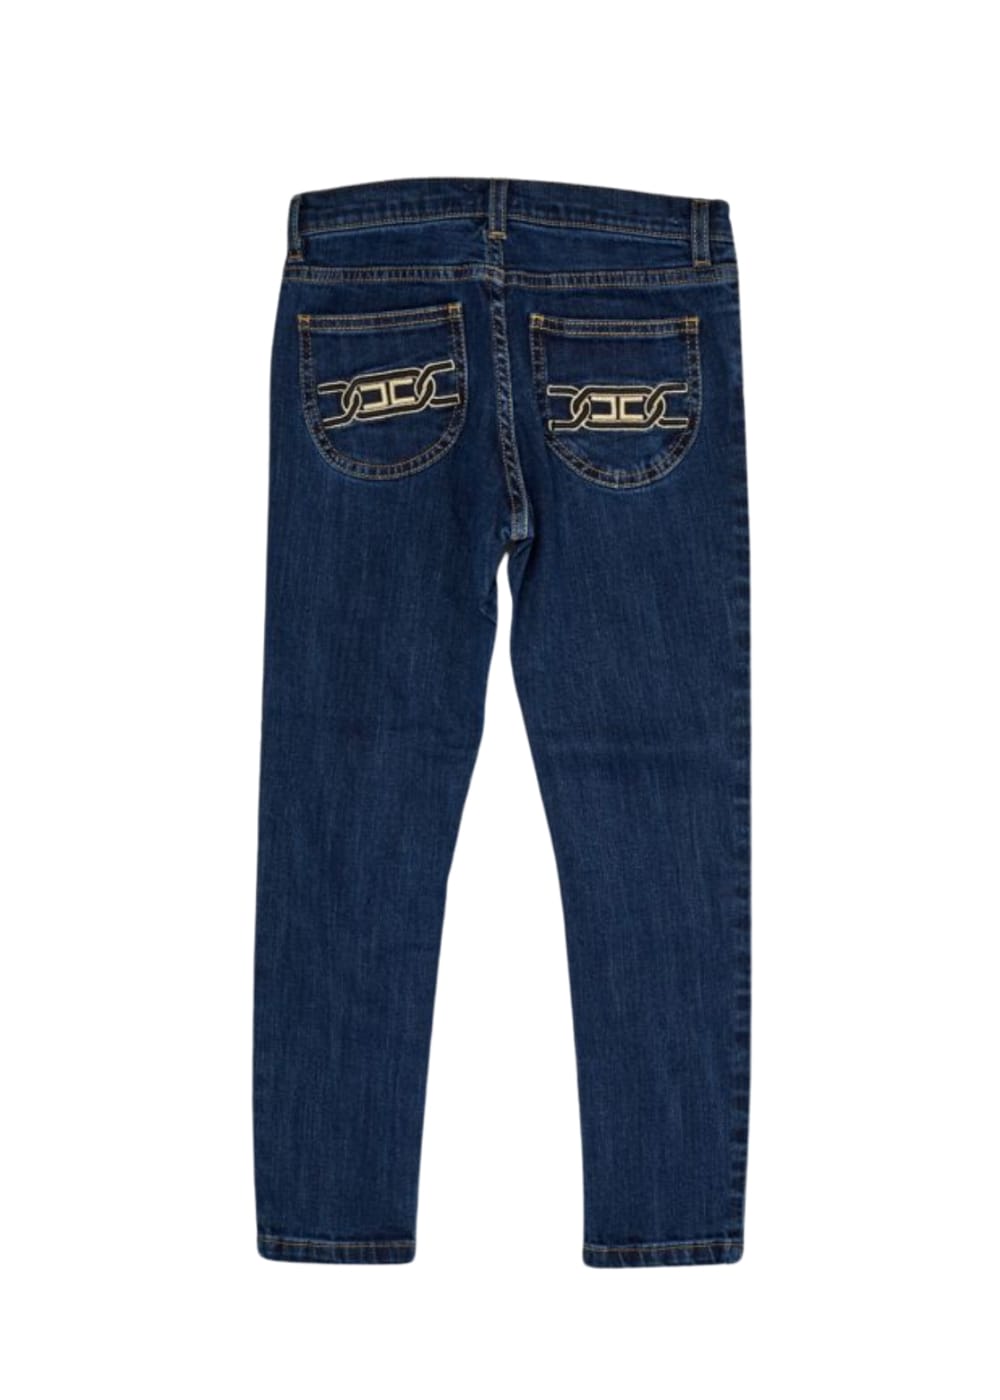 Featured image for “Elisabetta Franchi Jeans Skinny”